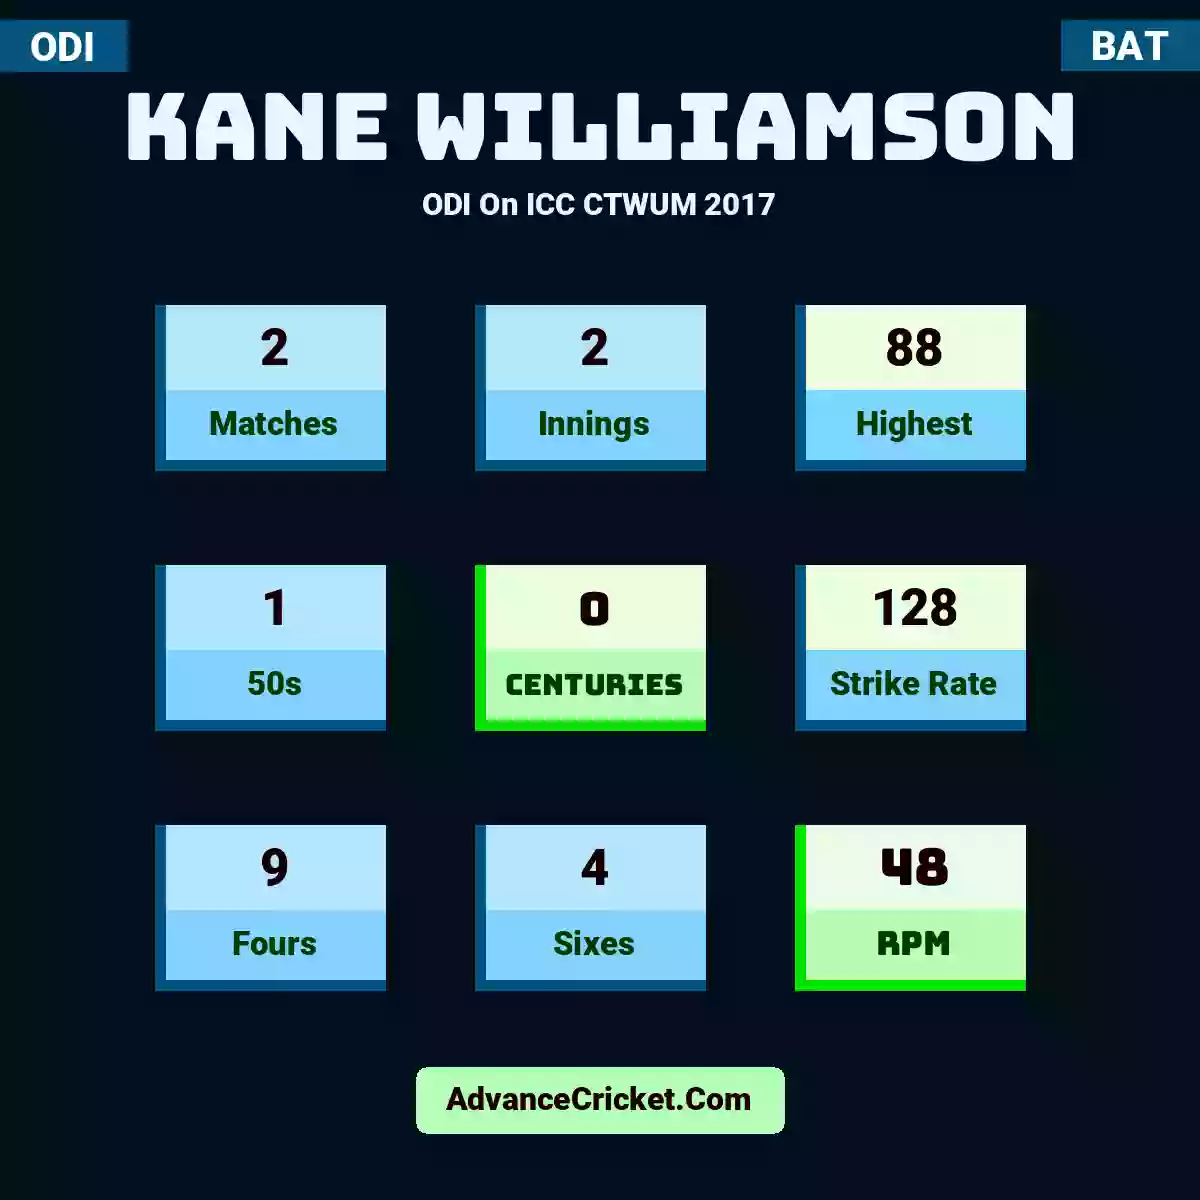 Kane Williamson ODI  On ICC CTWUM 2017, Kane Williamson played 2 matches, scored 88 runs as highest, 1 half-centuries, and 0 centuries, with a strike rate of 128. K.Williamson hit 9 fours and 4 sixes, with an RPM of 48.